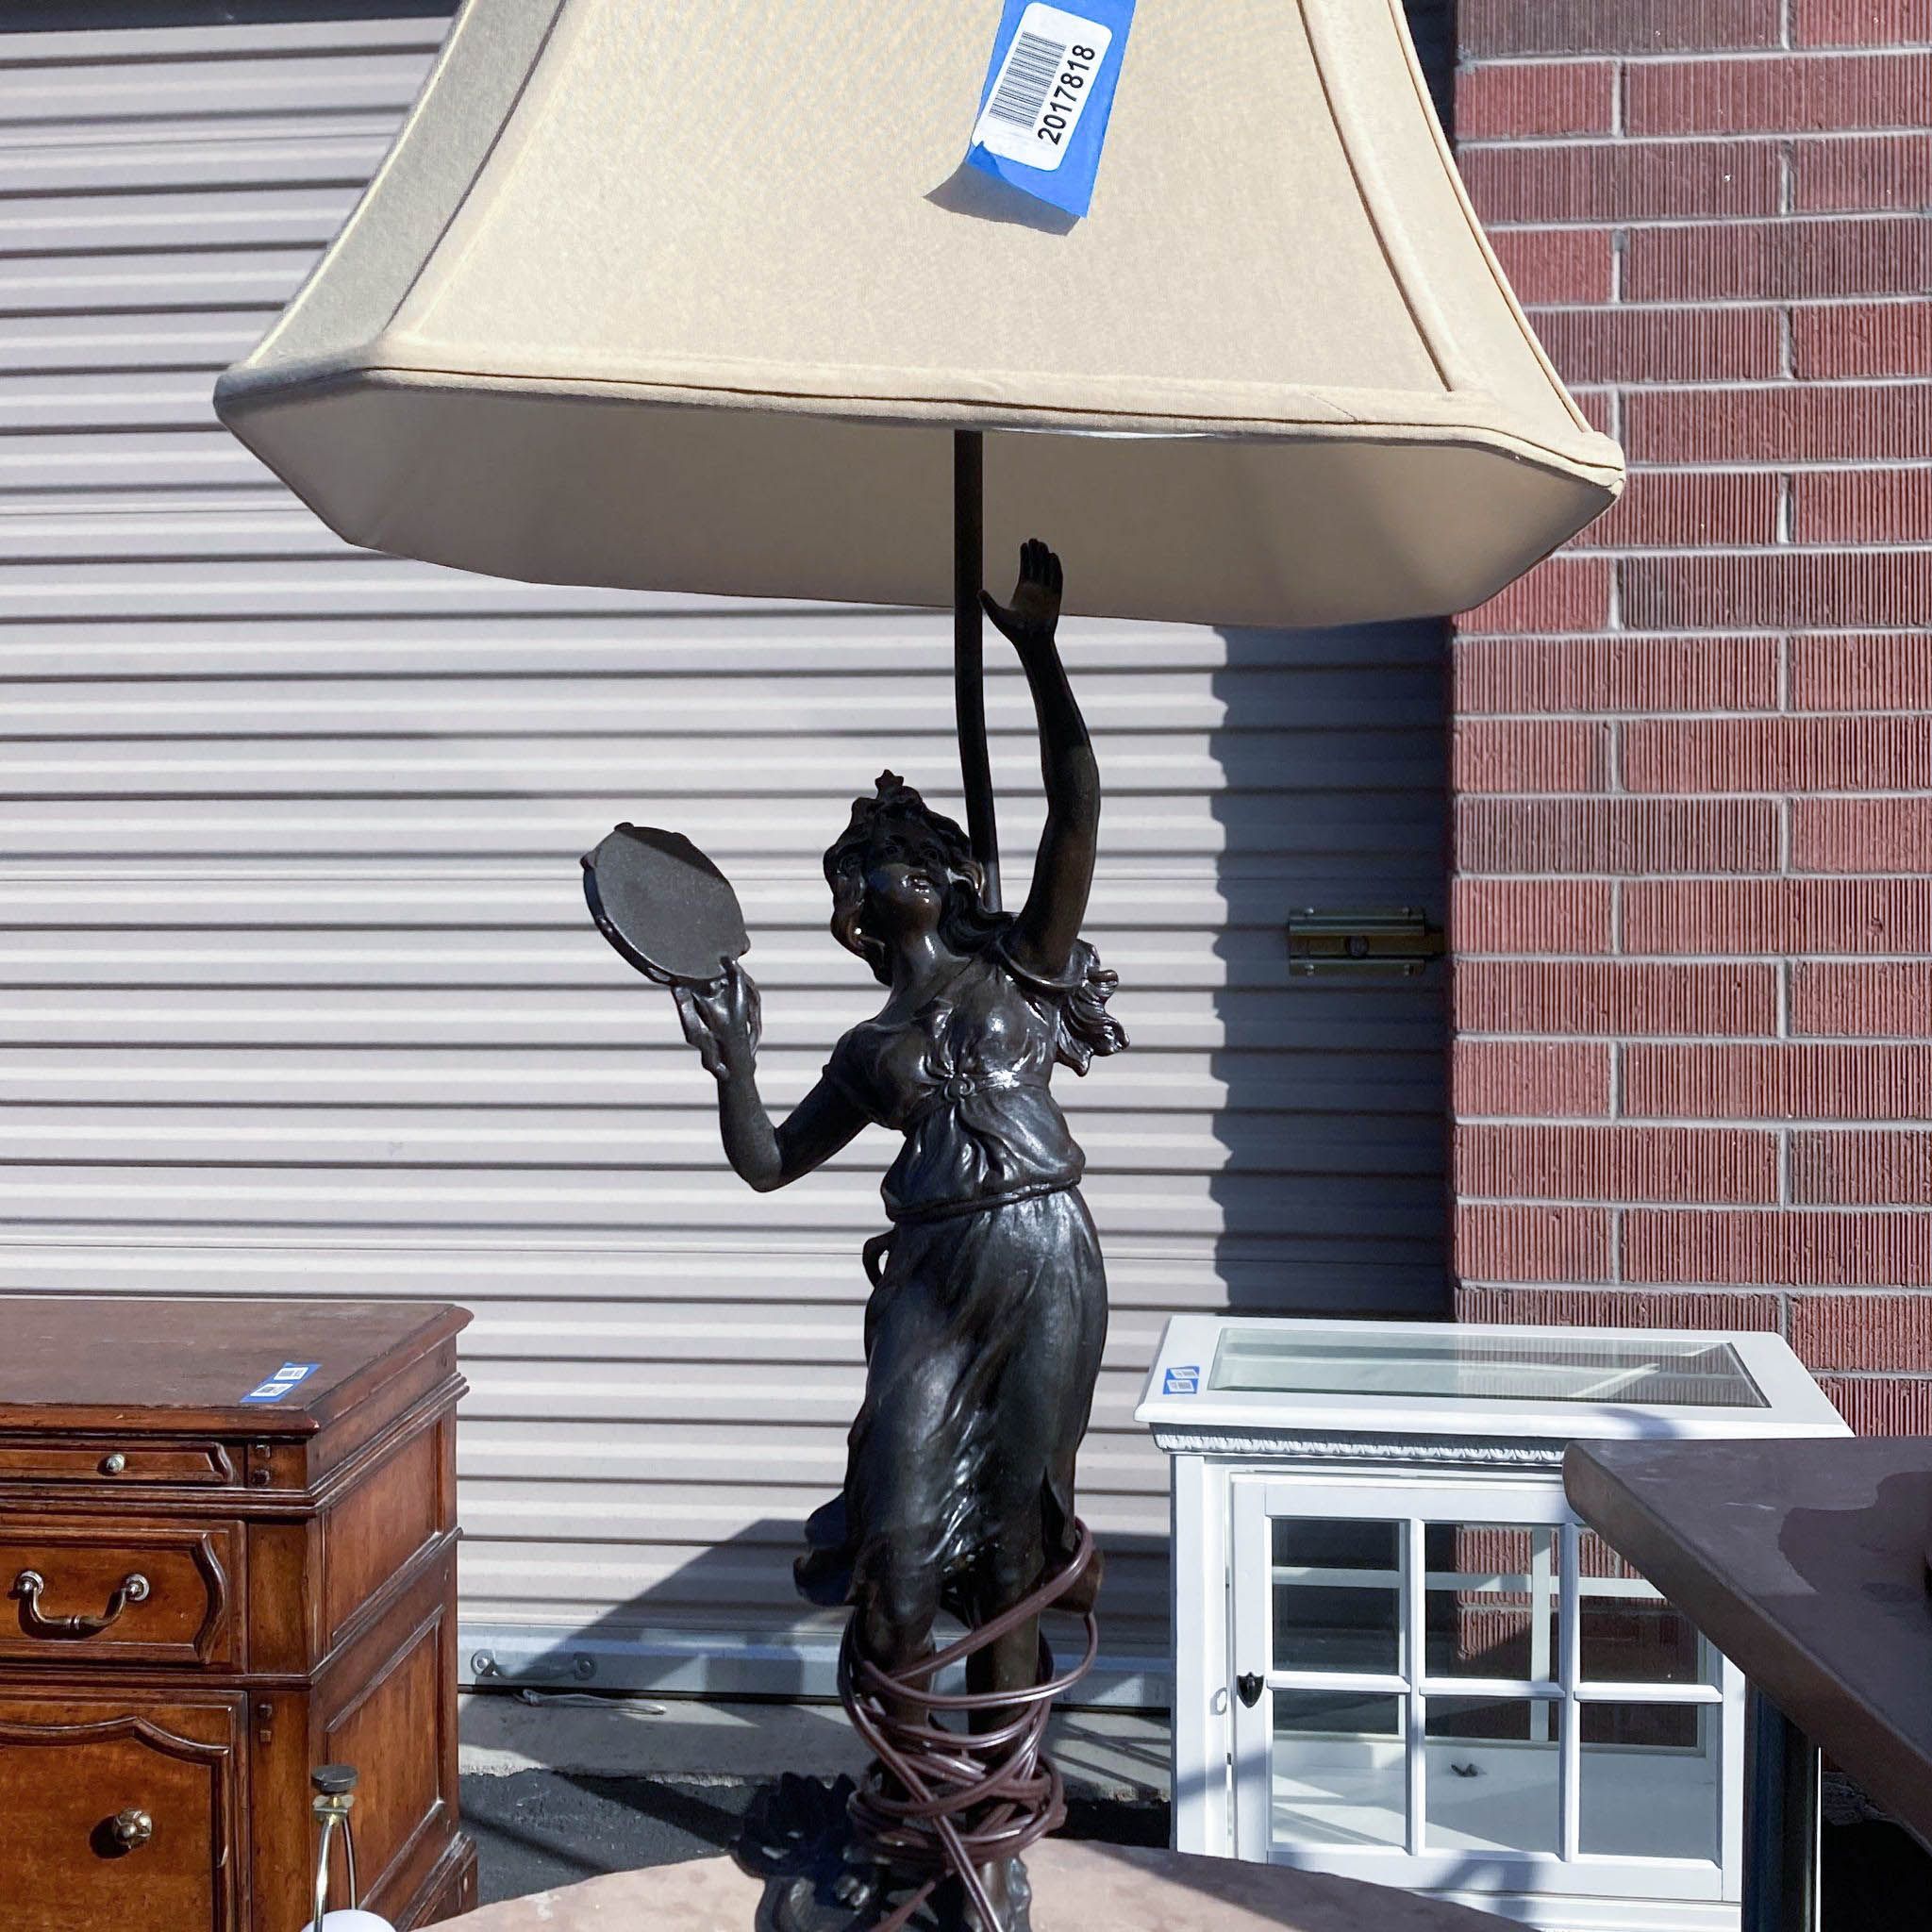 Alt text 2: Outdoor image of a Reperch lamp with a statuette base of a woman holding a mirror, a beige lampshade above her, and a price tag.